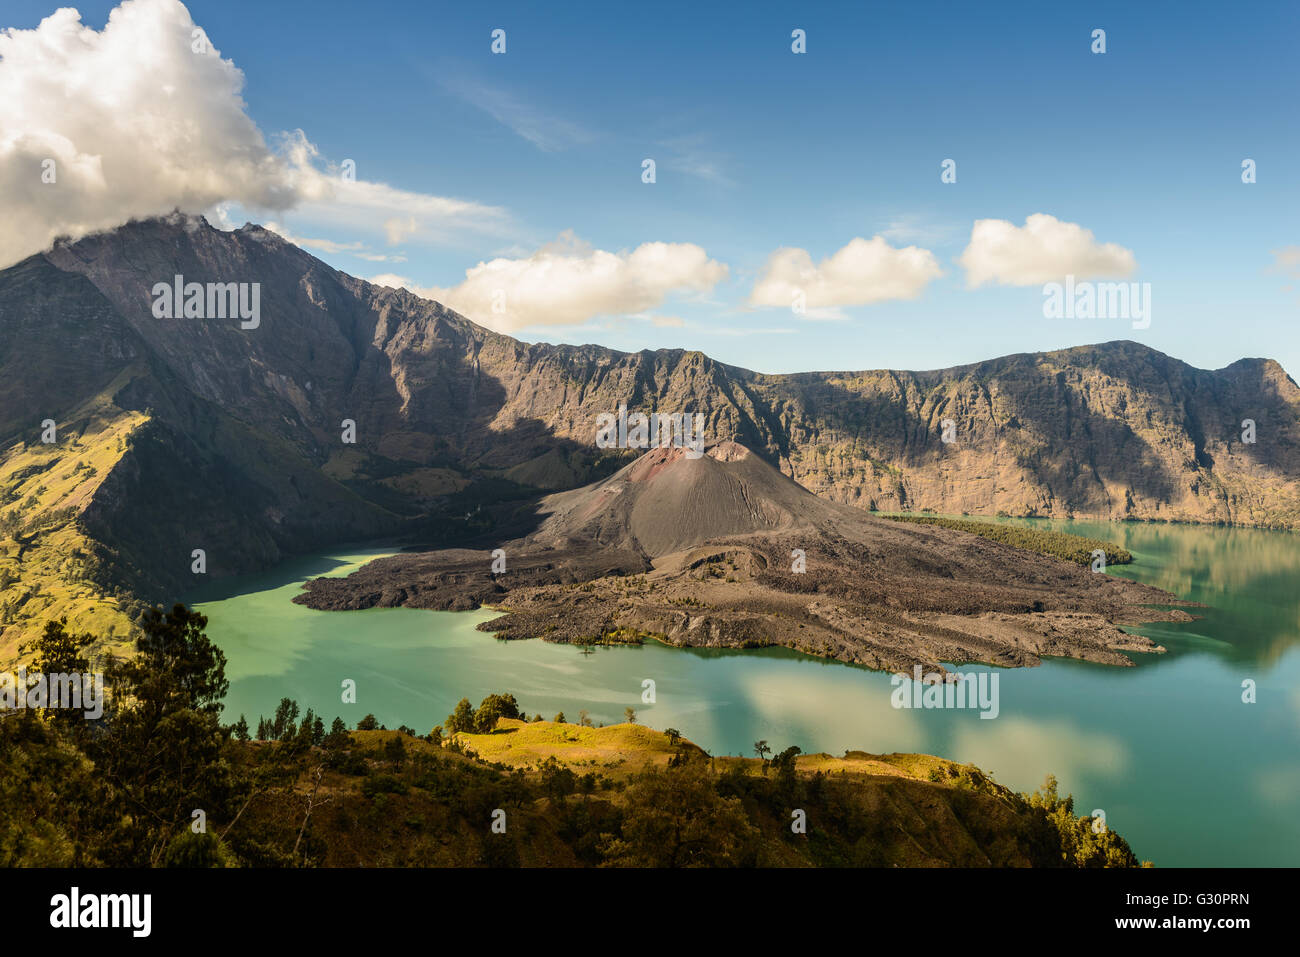 Mt Rinjani from the western side of the crater Stock Photo